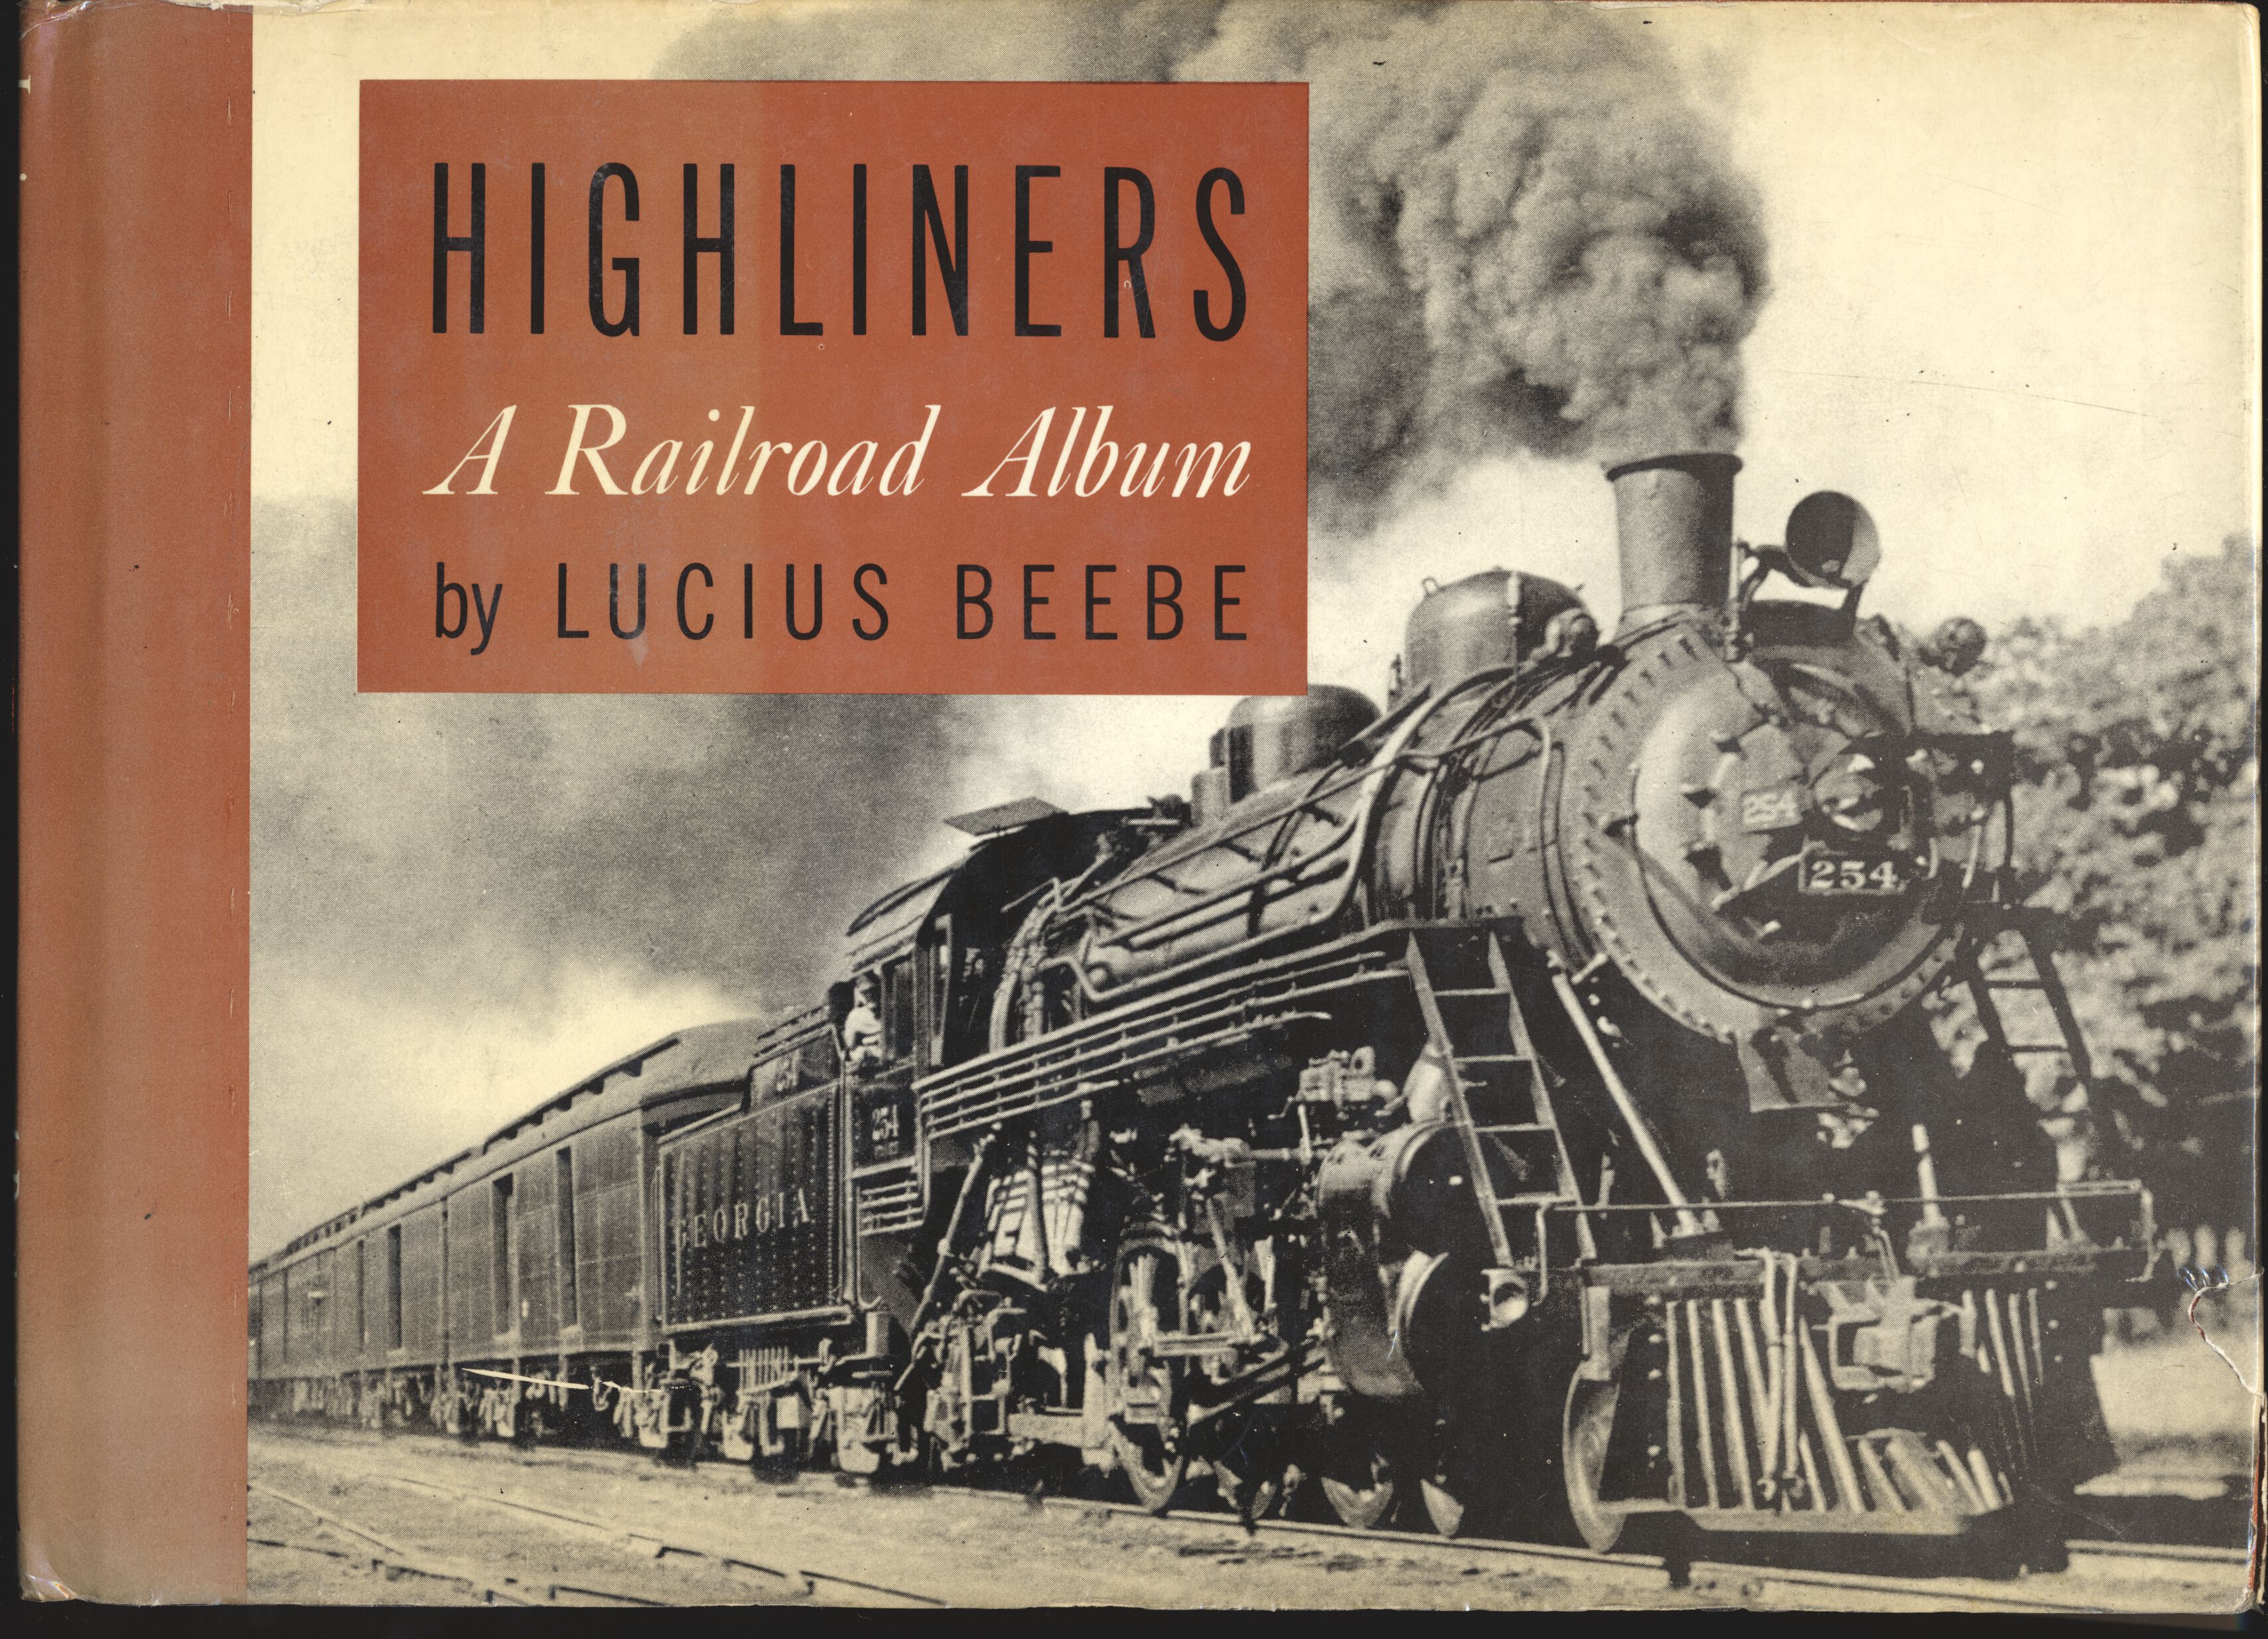 Highliners A Railroad Album - Lucius Beebe